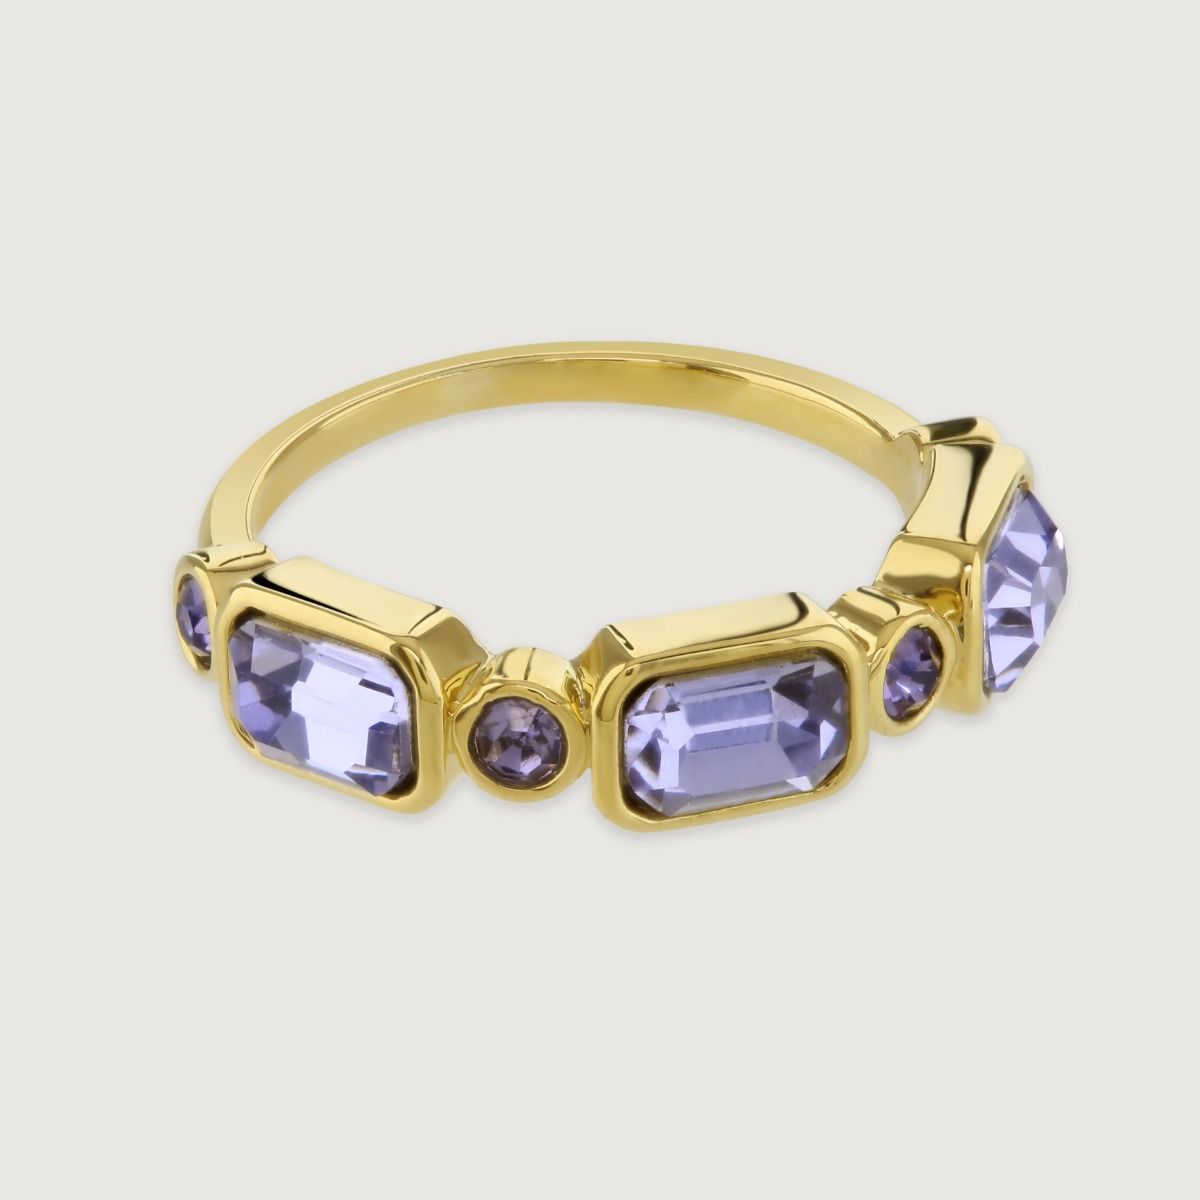 The Geometric Ring showcases masterful craftsmanship with geometric bezel set stones which are placed on a delicate band. Versatile and eye-catching, this piece complements any style, making it perfect to wear with plain stacking rings or to stand alone a